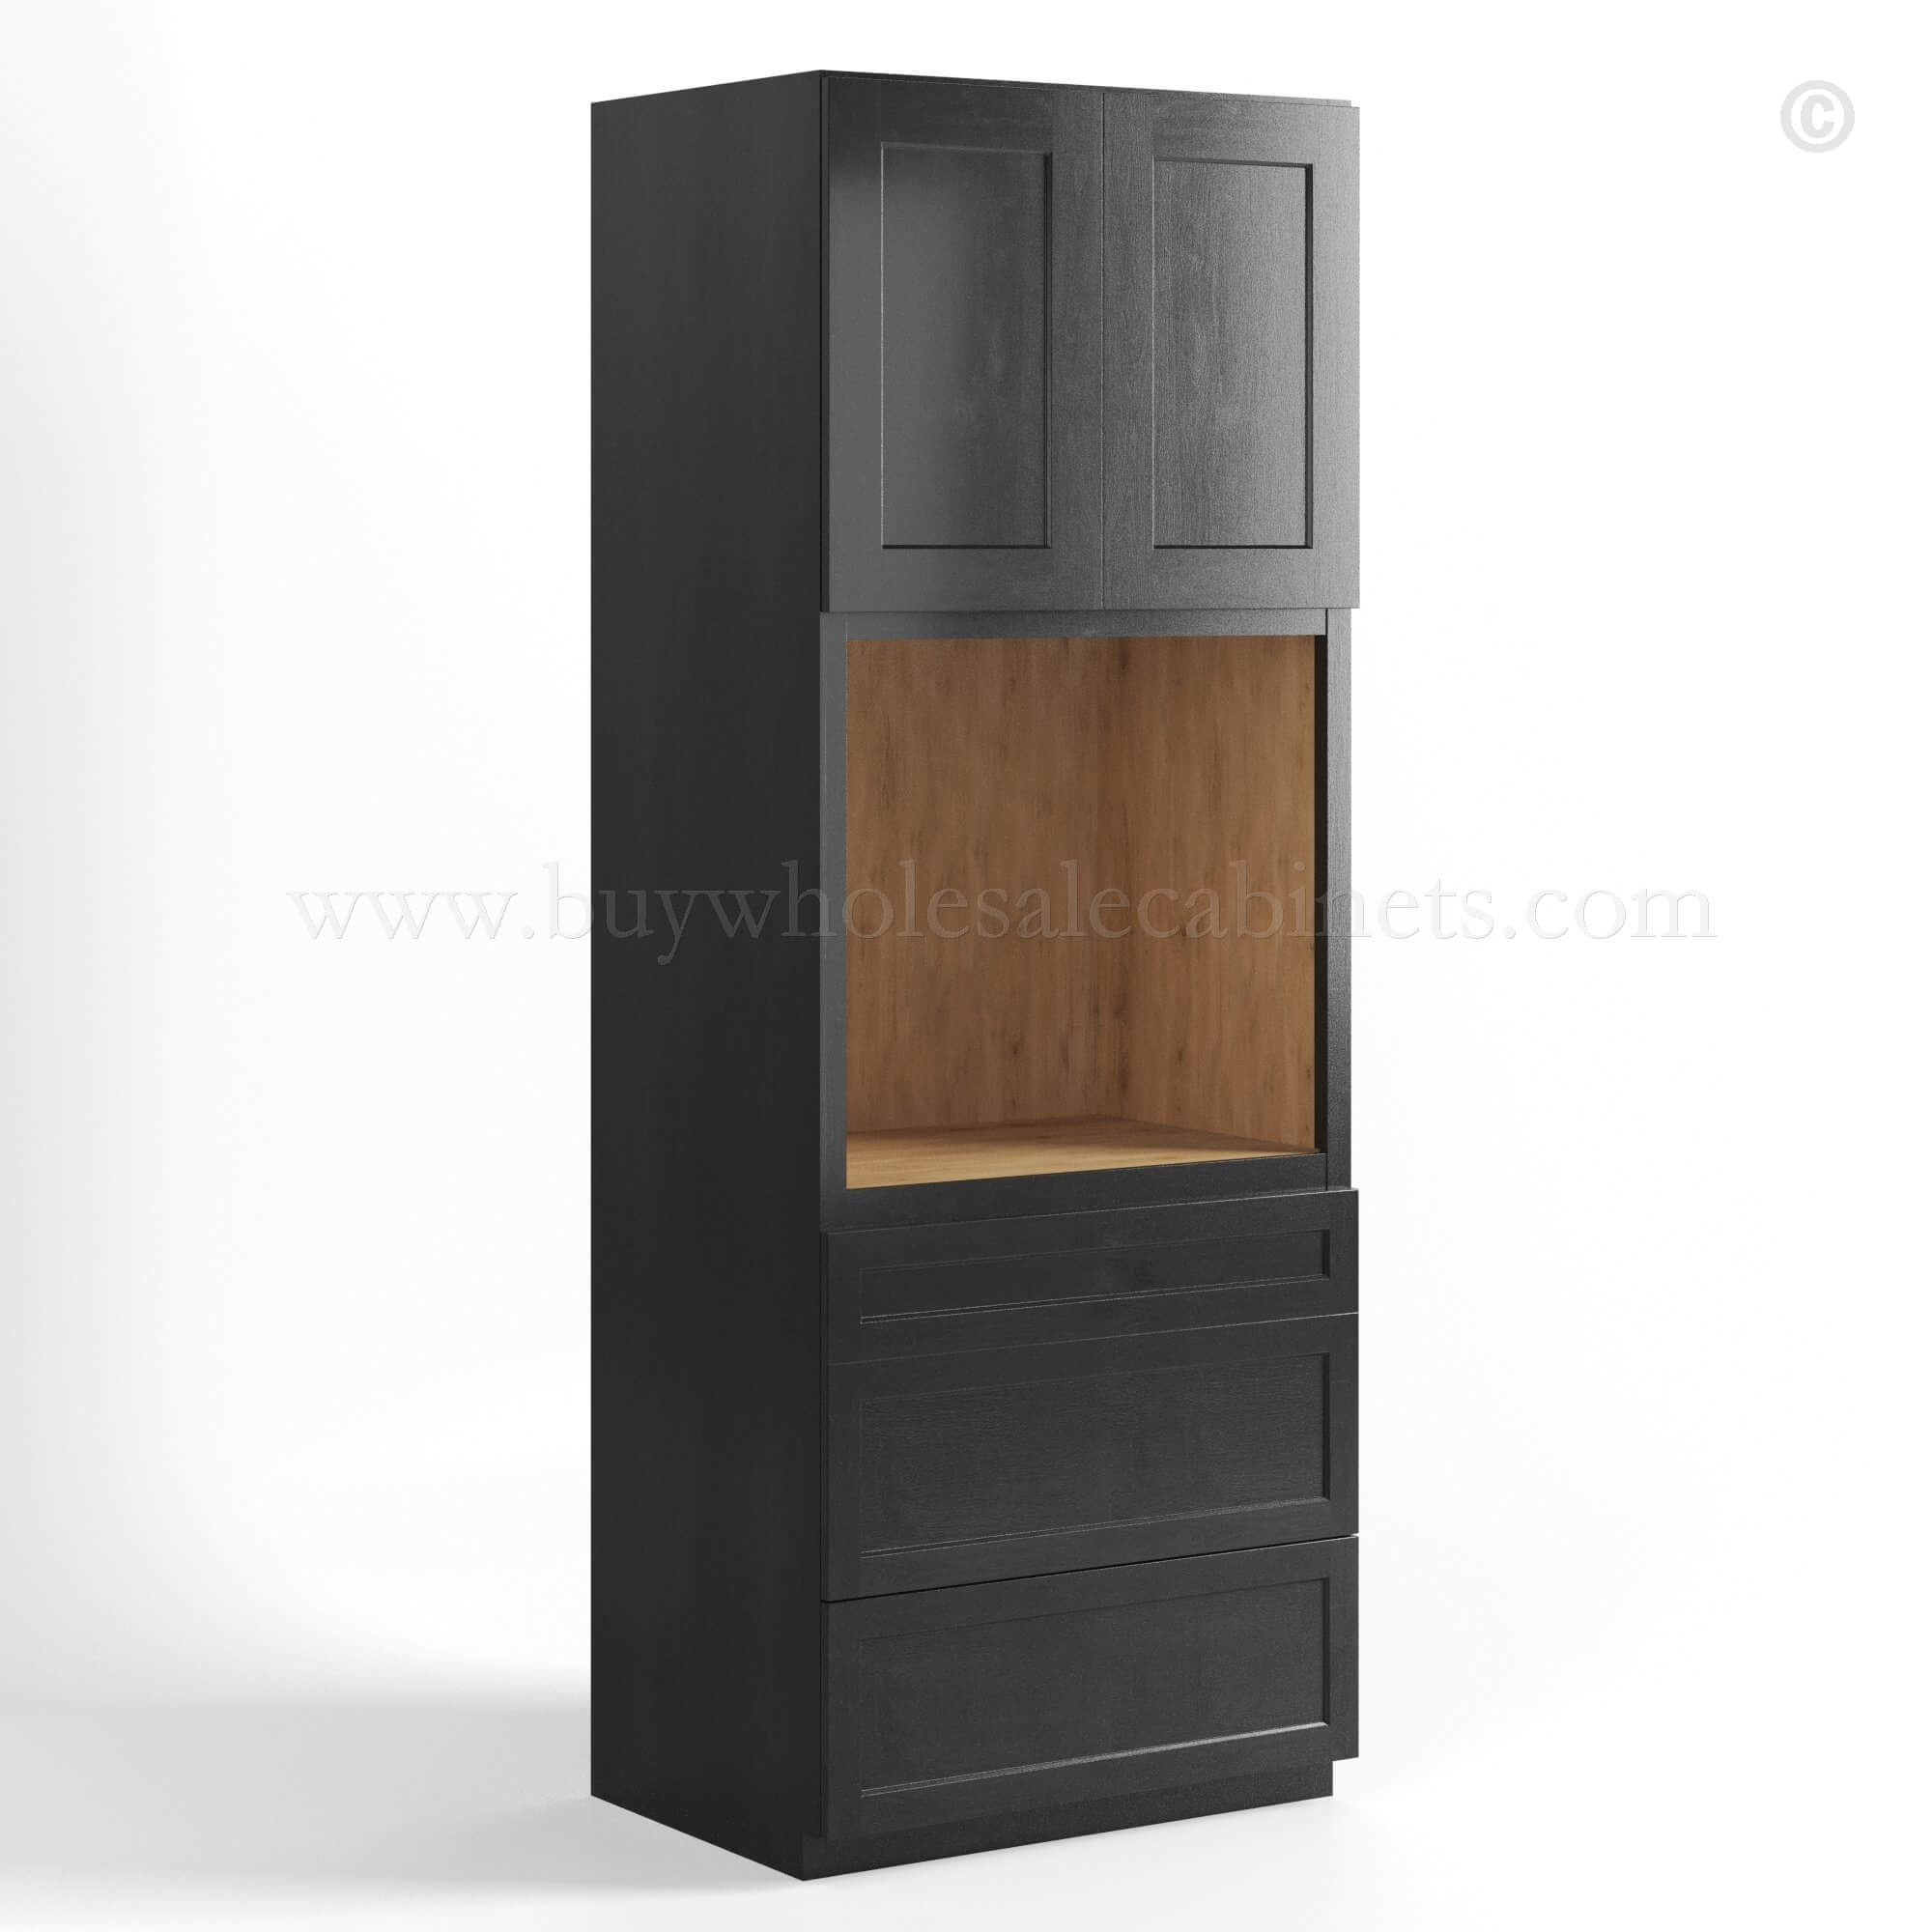 Charcoal Black Shaker Tall Universal Oven Cabinet, rta cabinets, wholesale cabinets